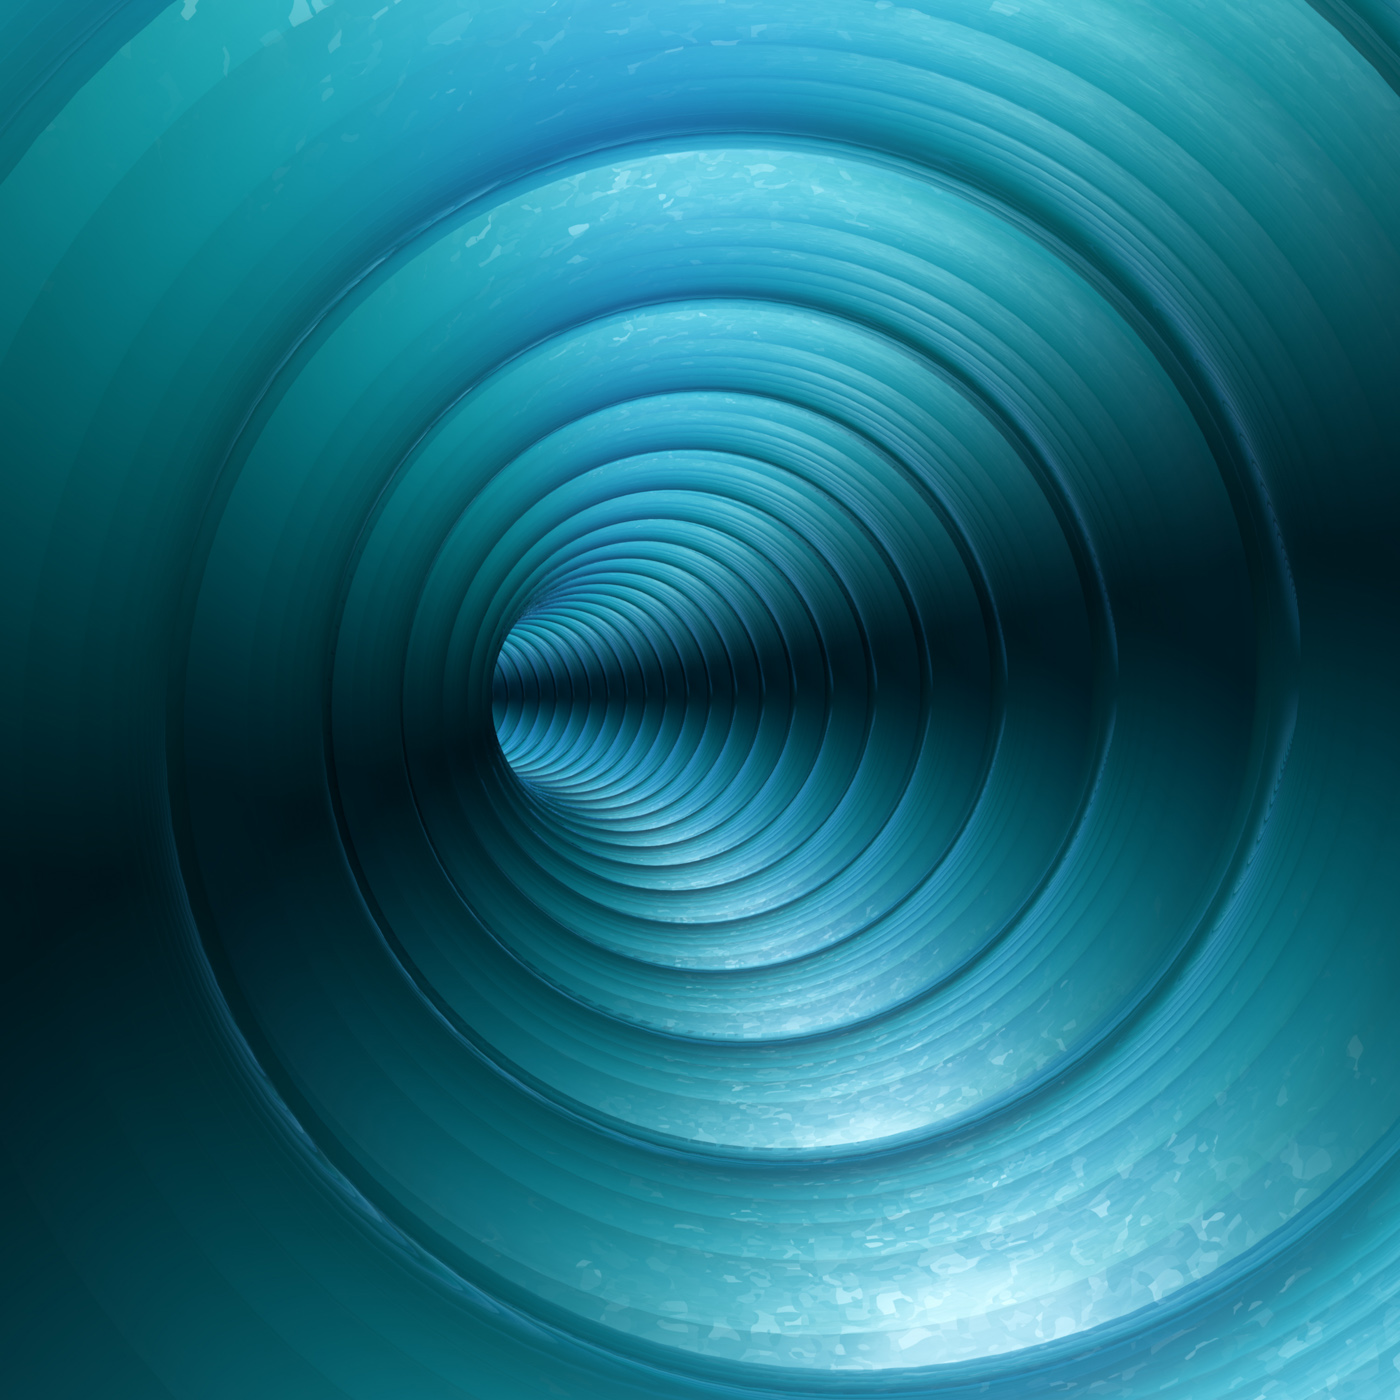 Photo Turquoise Vortex Abstract Background With Twirling